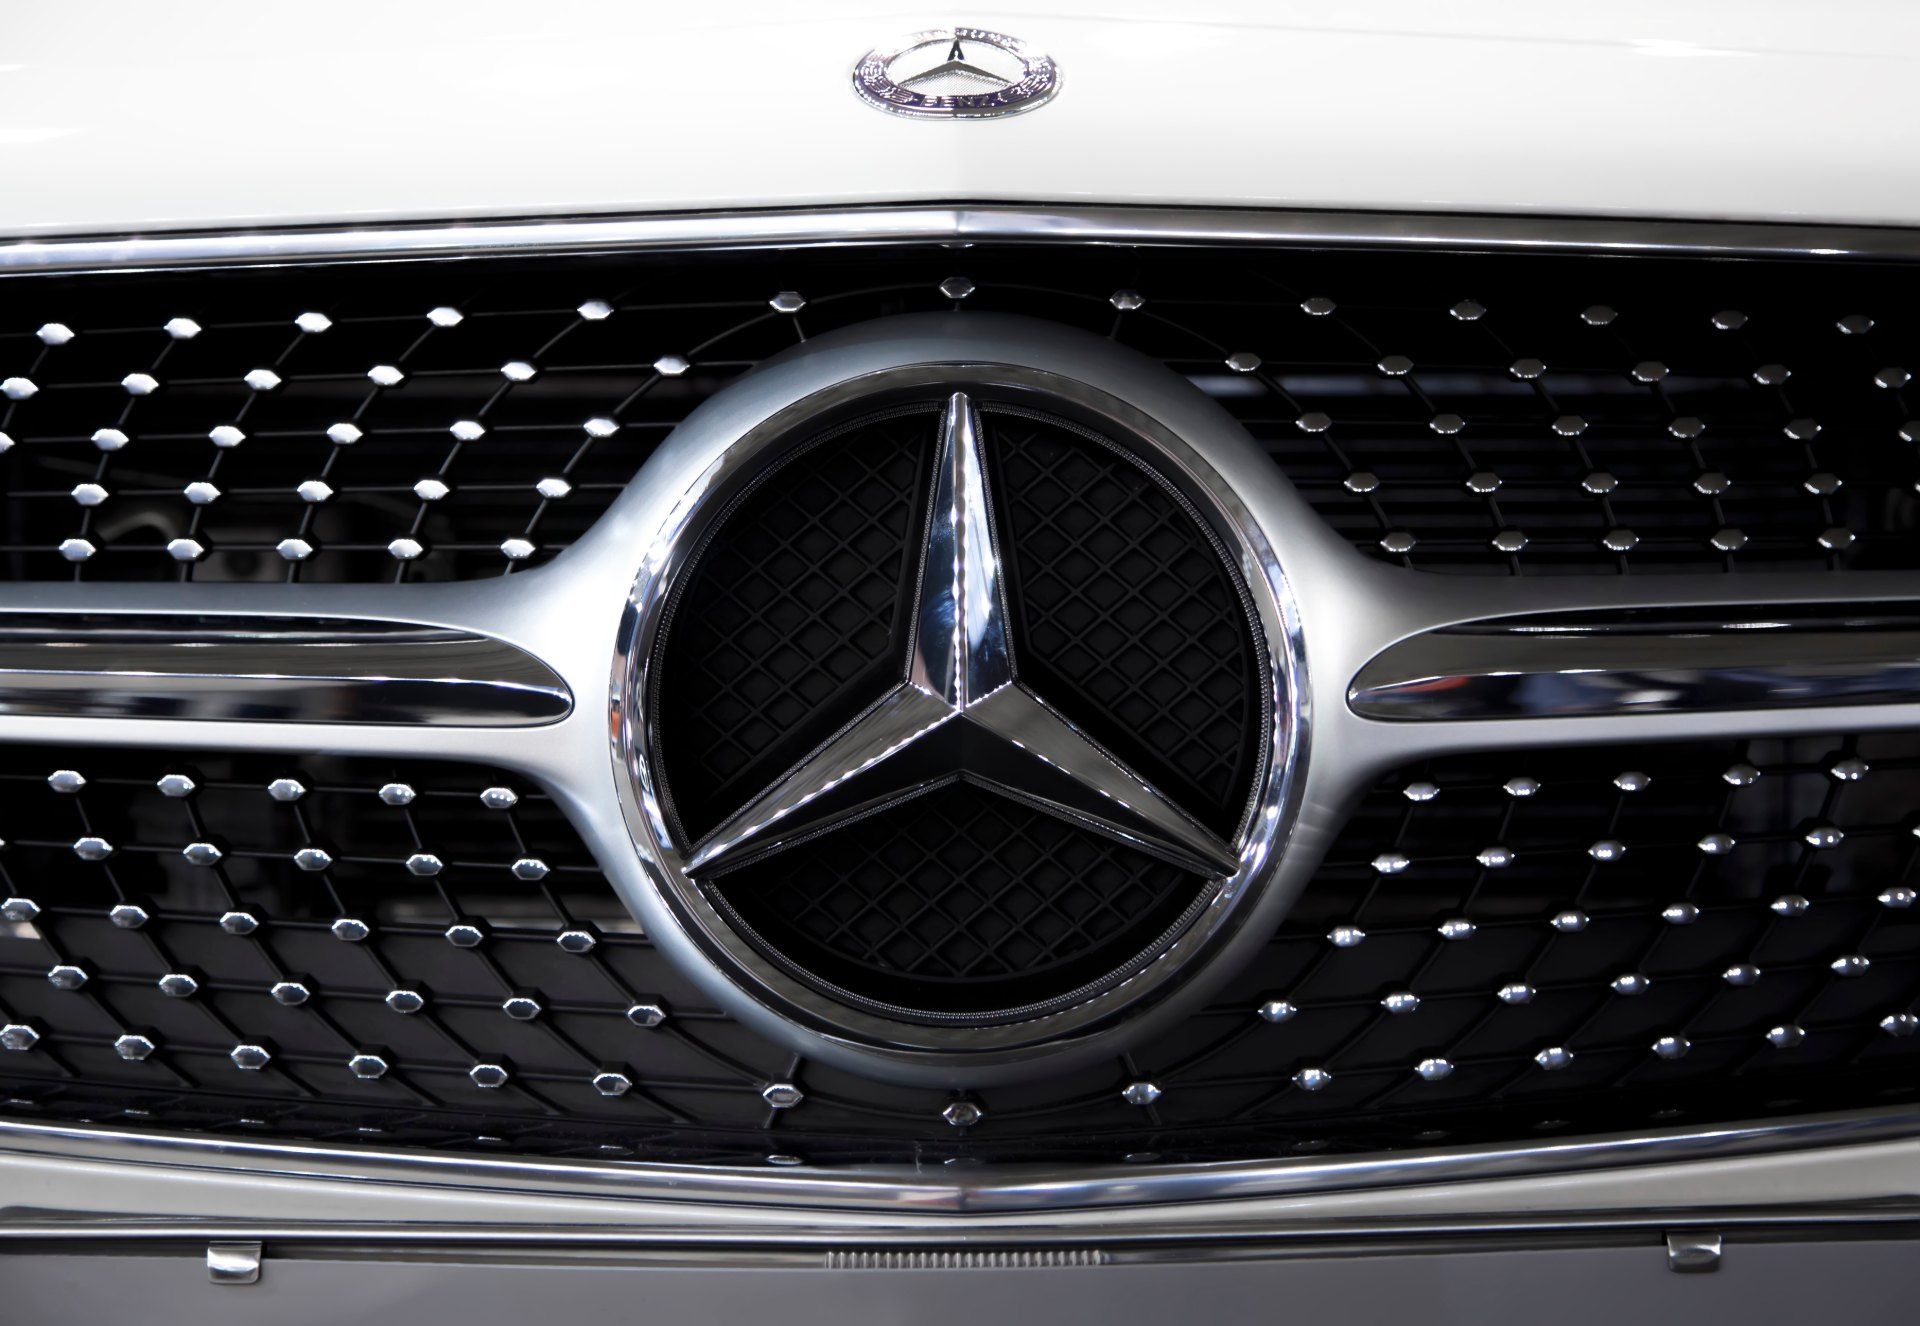 Mercedes-Benz sued in class action over alleged diesel emission 'cheat  devices', Automotive emissions